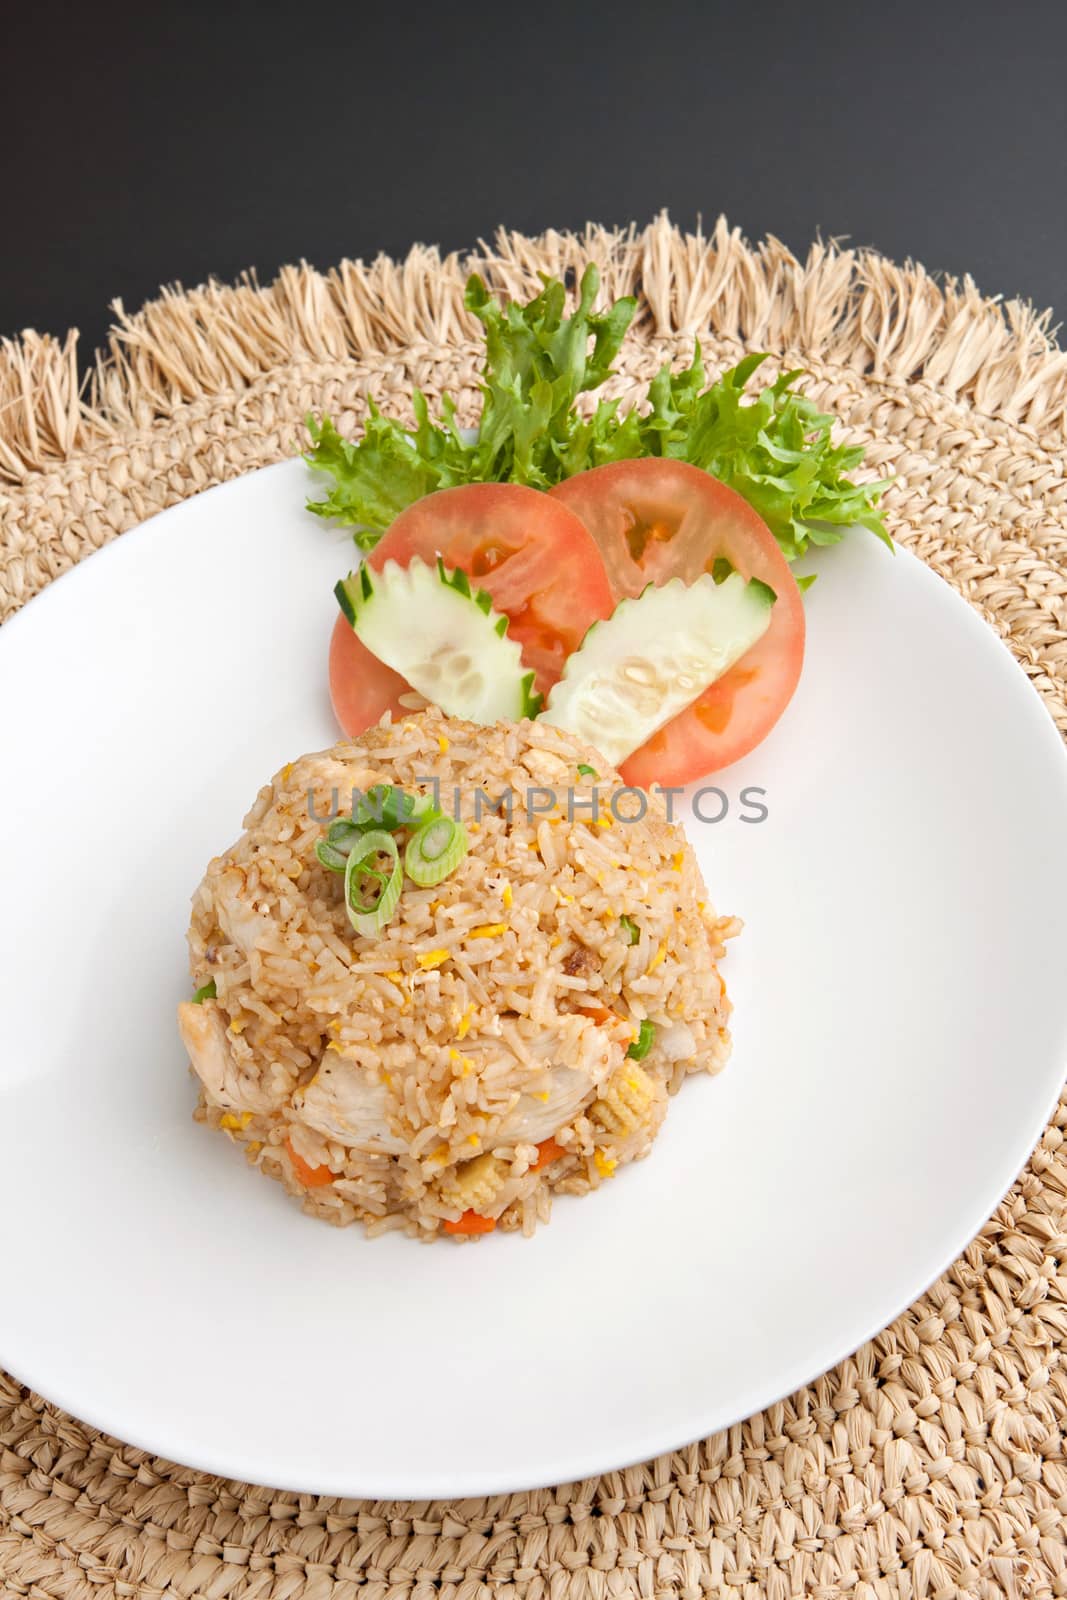 A Thai dish of crab fried rice presented on a square white plate.